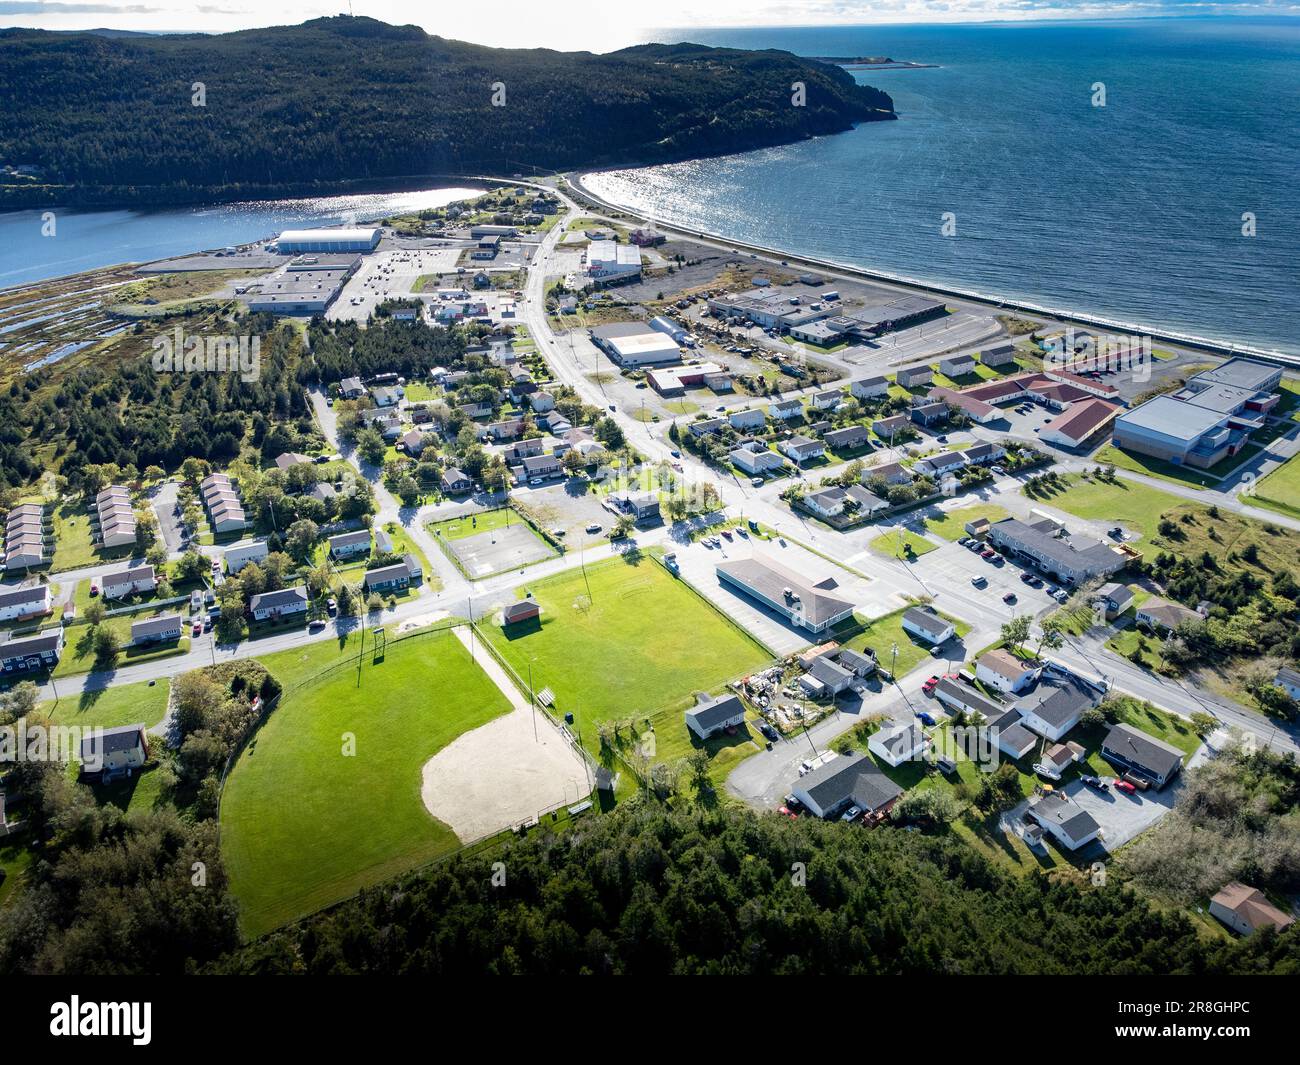 Aerial Newfoundland town of Placentia overlooking baseball diamonds and sports fields with sandy beaches in Atlantic Canada. Stock Photo